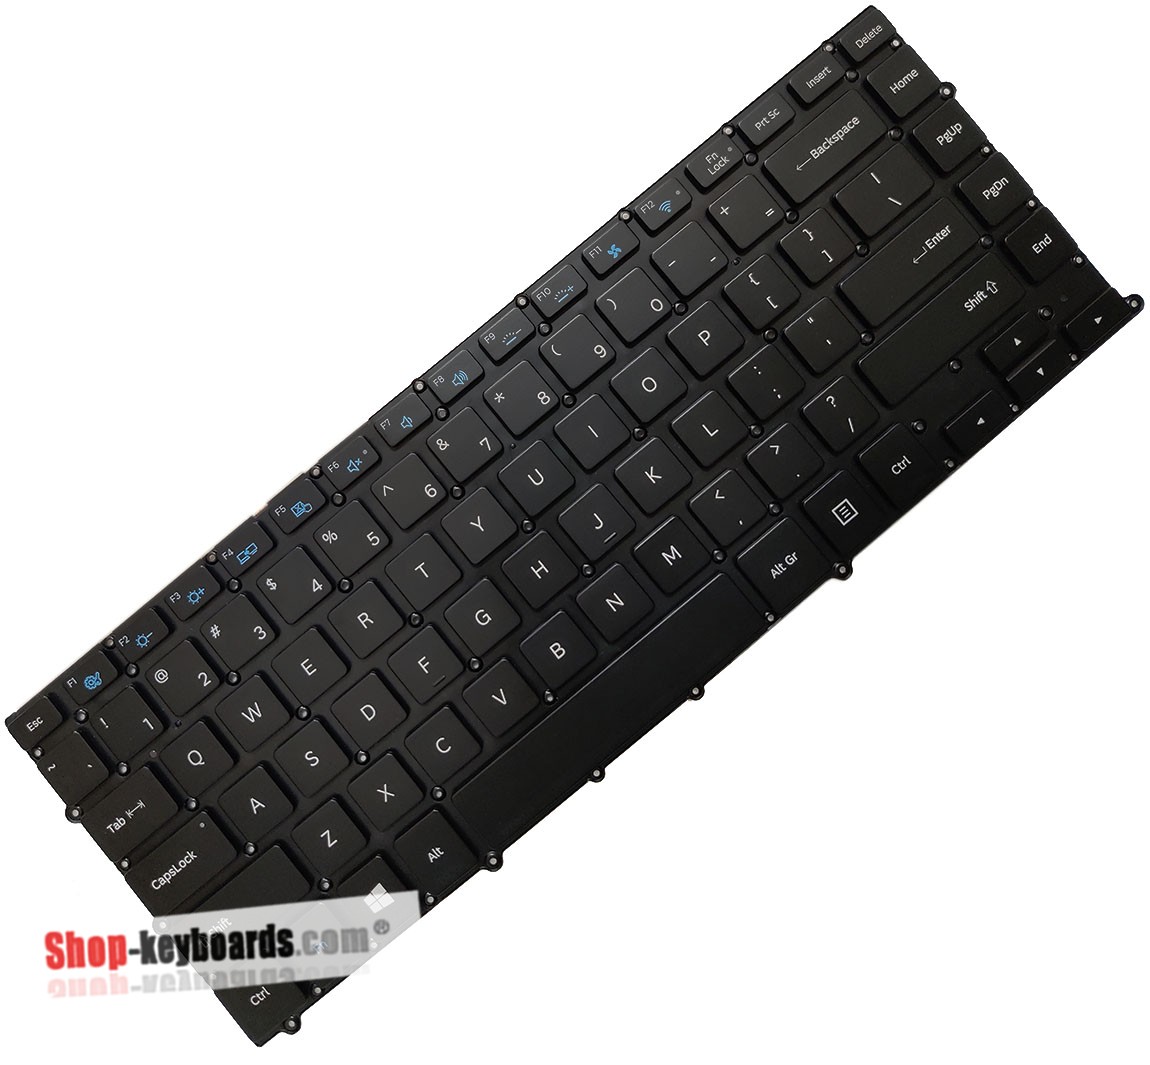 Samsung NT900X4B-A78  Keyboard replacement